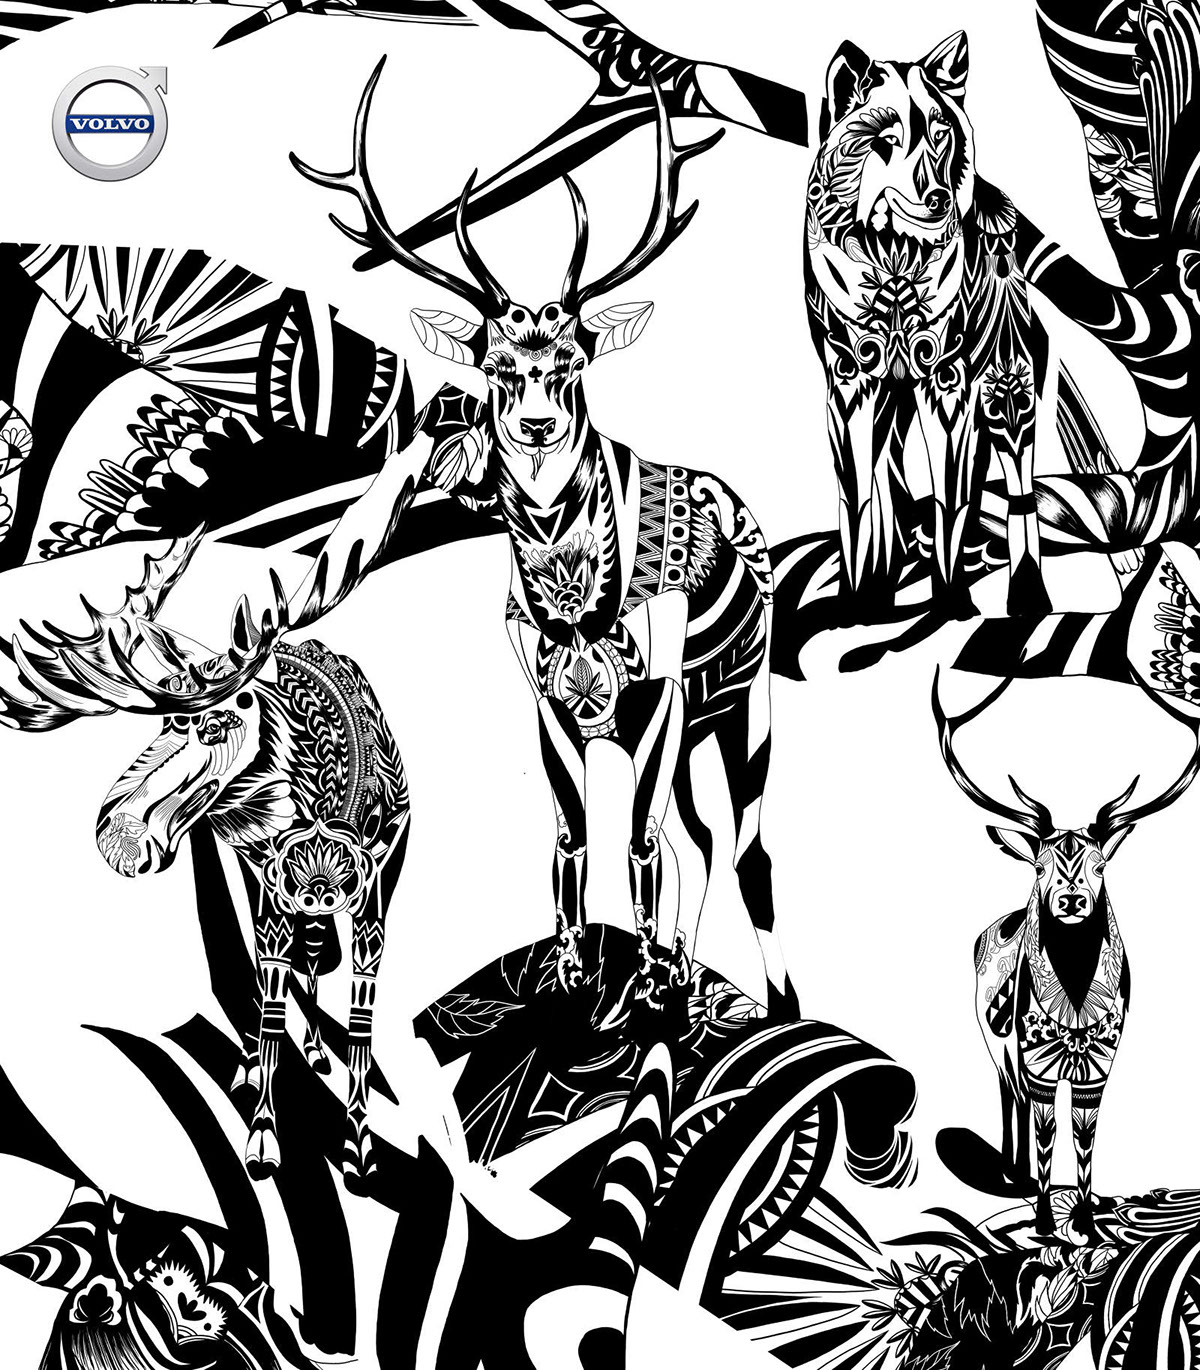 Mural black and white design art live drawing Volvo Cars animals Scandinavian graphics wolf elk moose forest